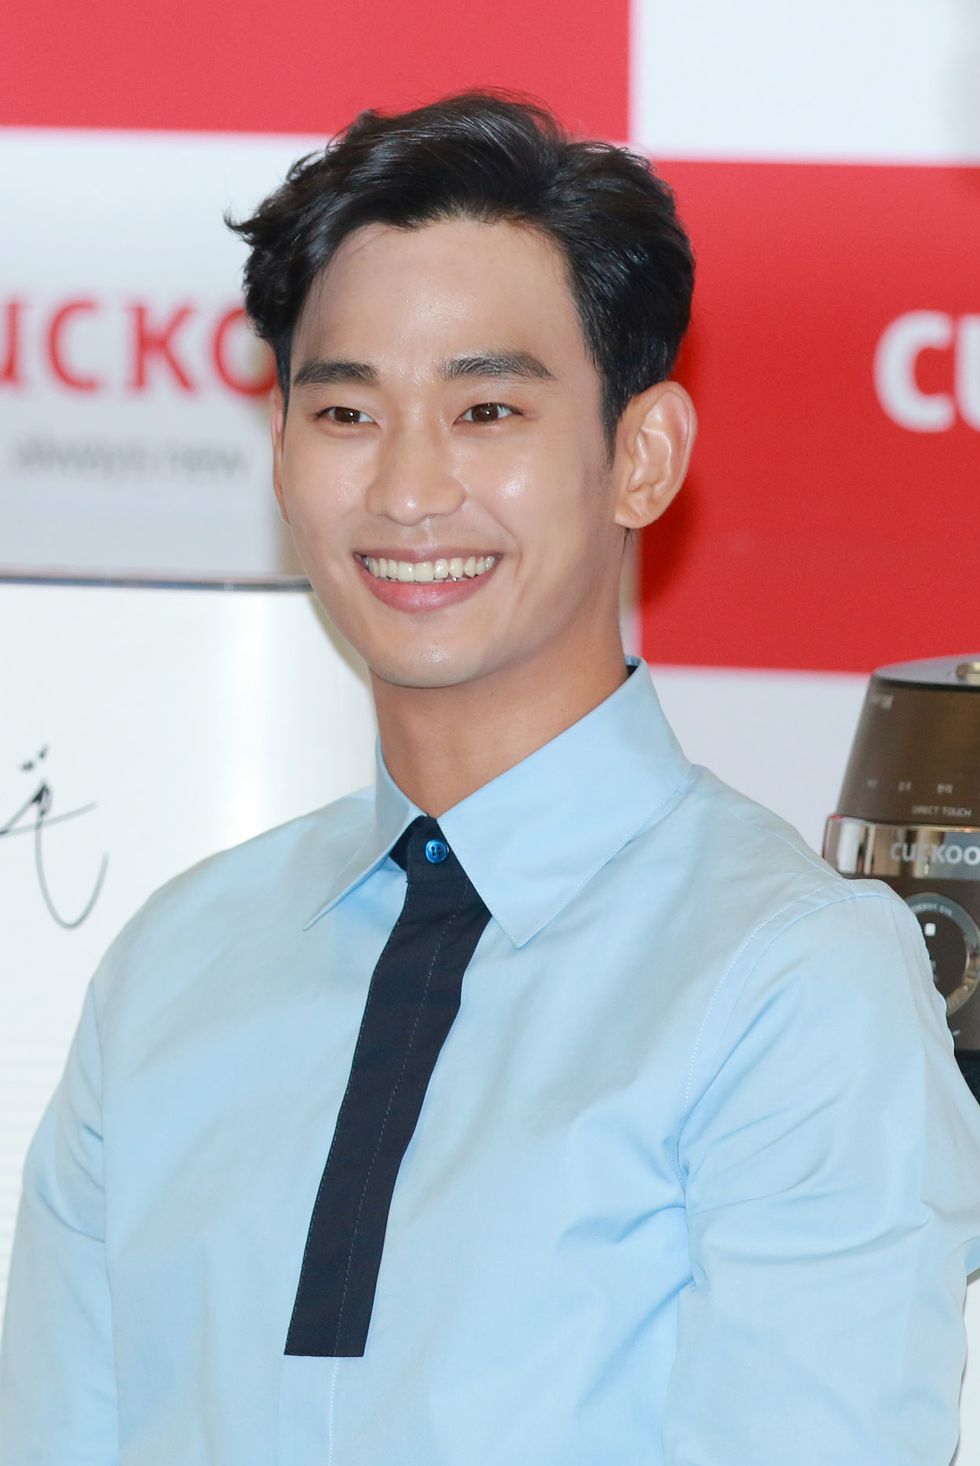 kim soo hyun attends commercial event in seoul